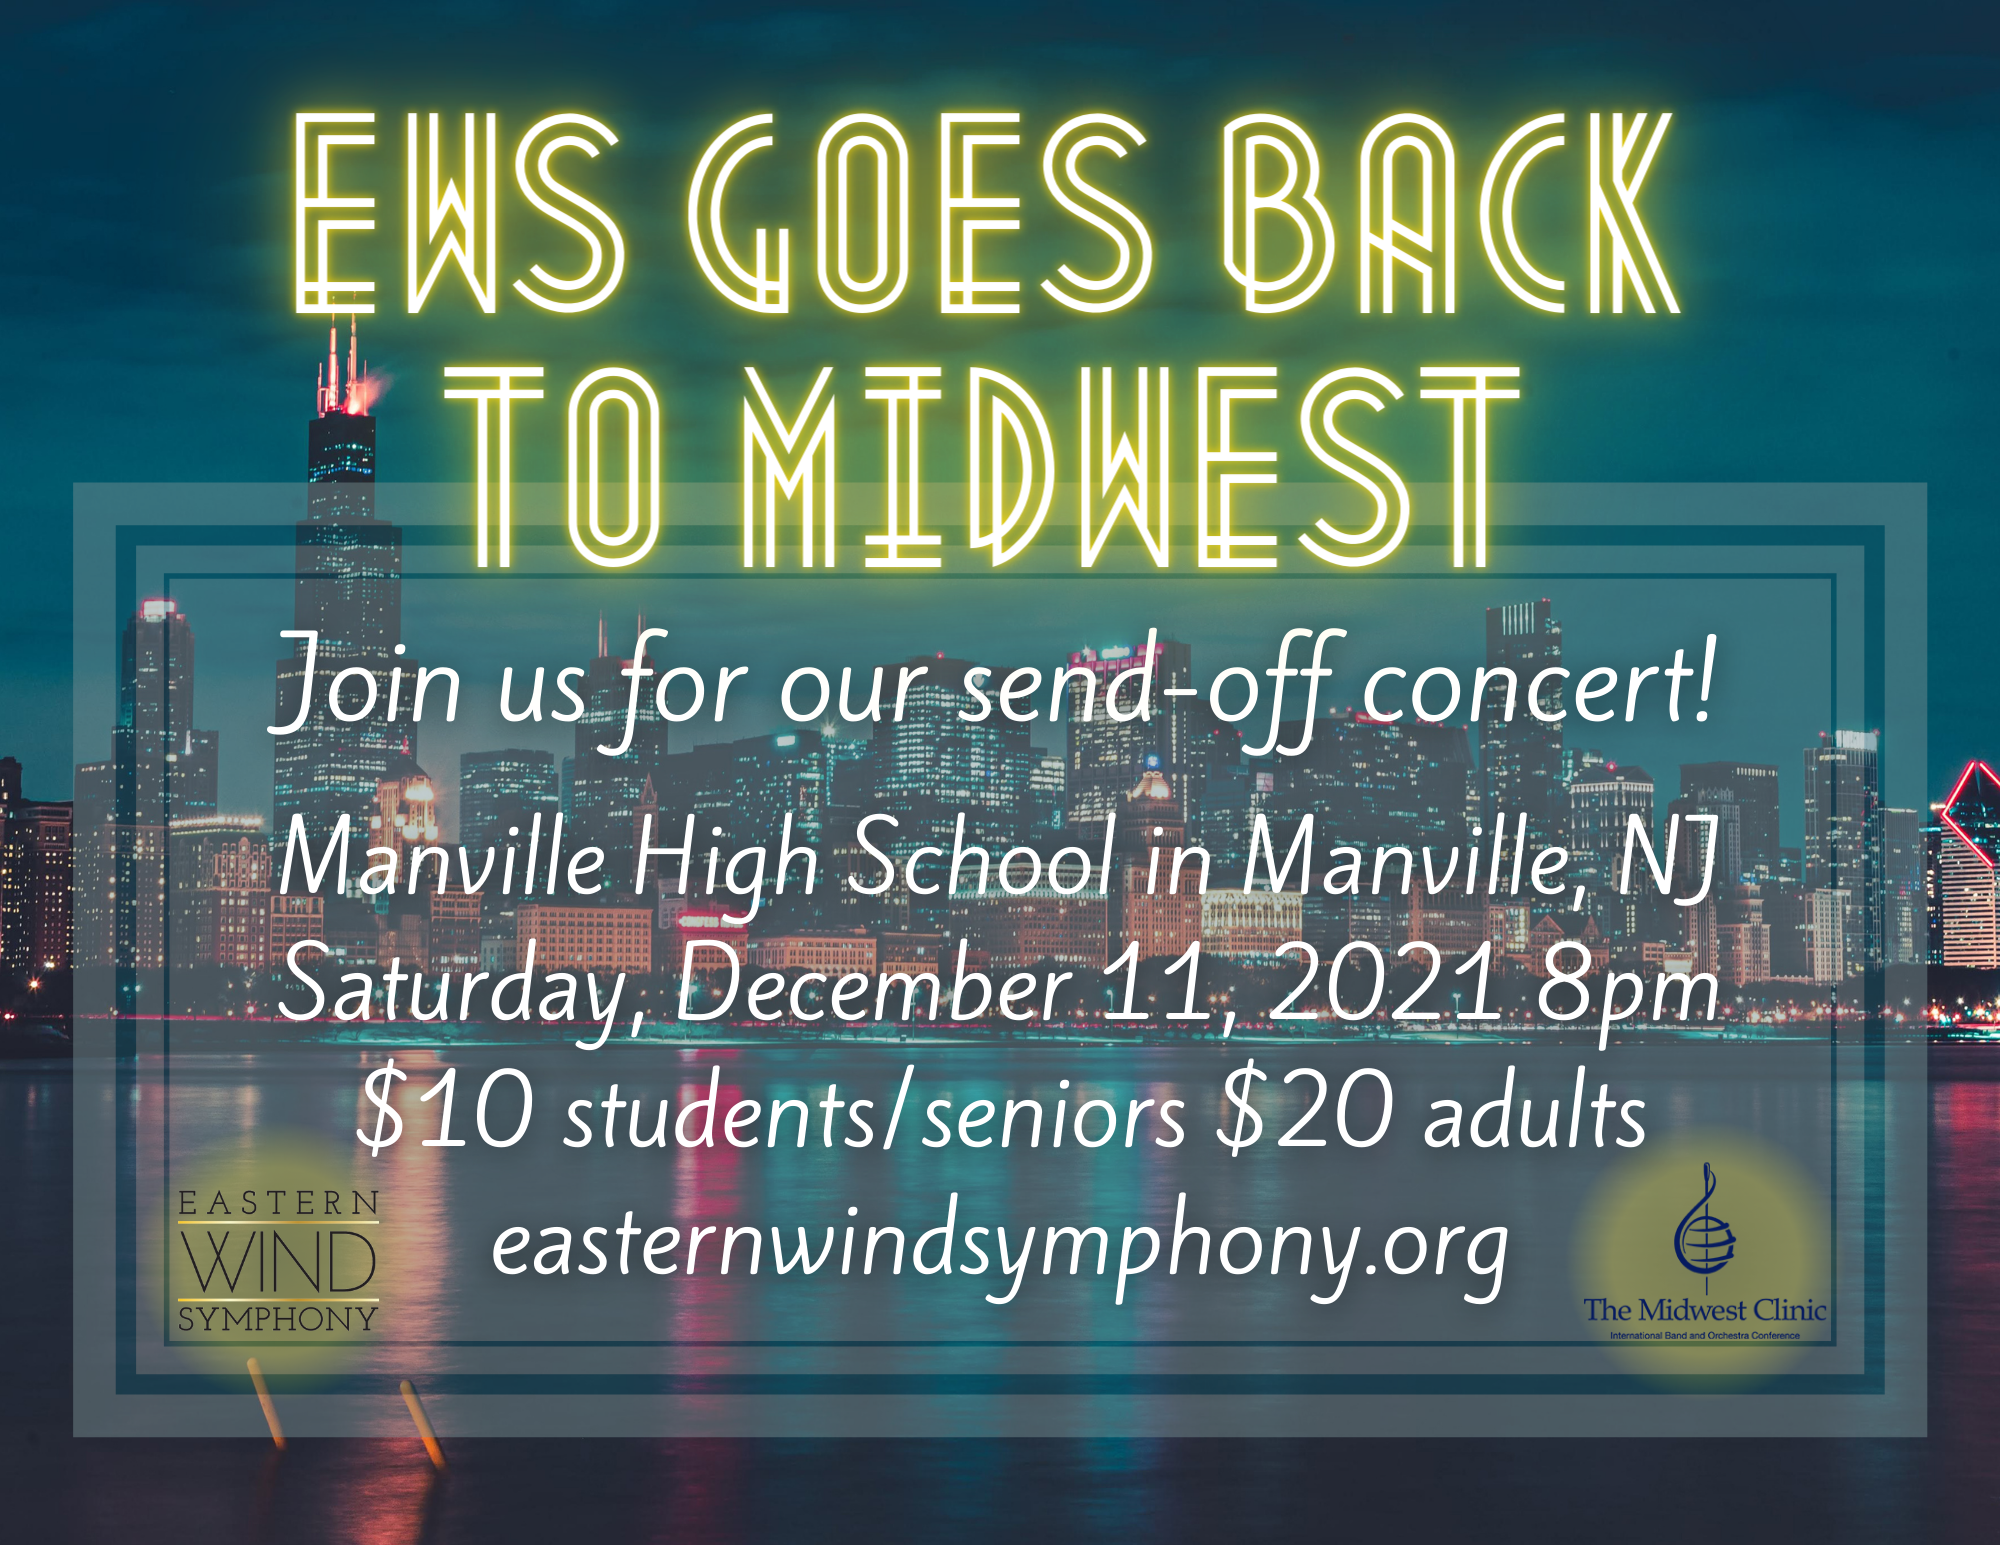 EWS Goes Back to Midwest